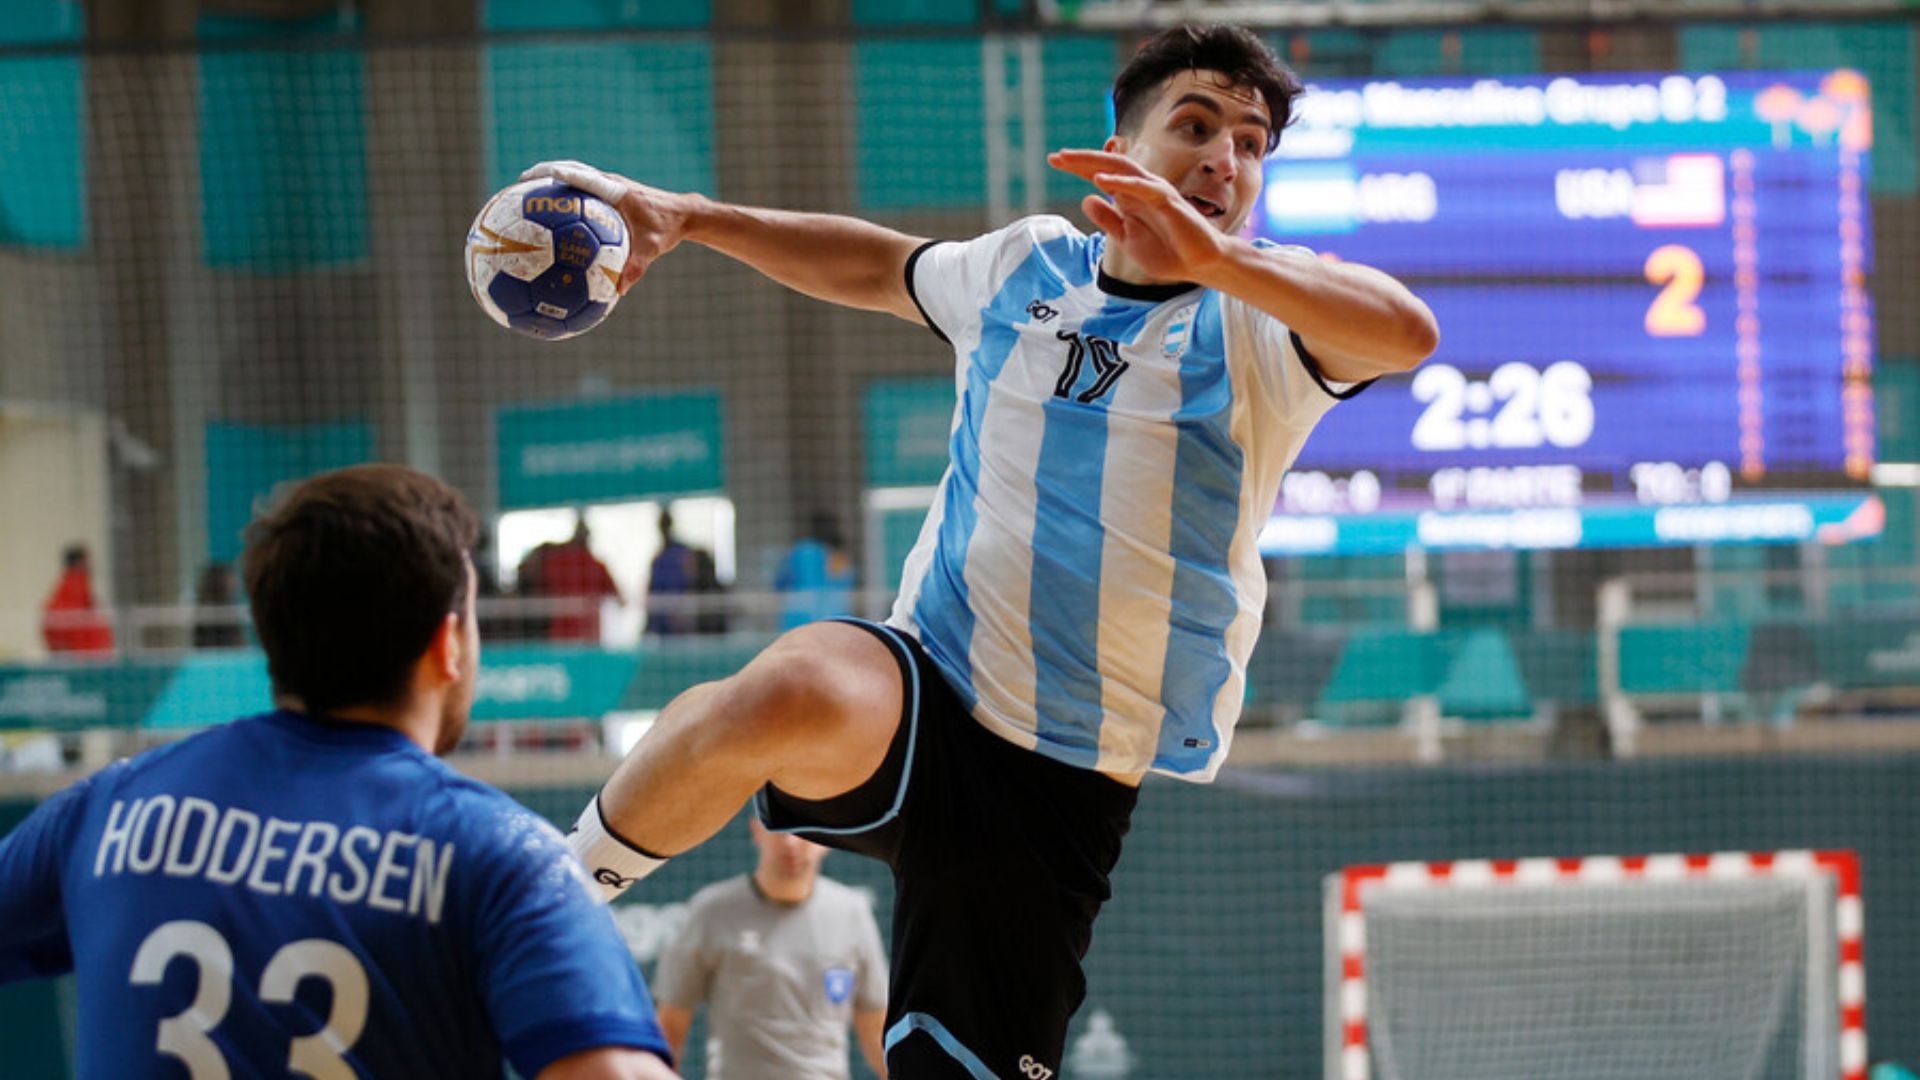 Male’s Handball: Argentina successfully began the defense of their title